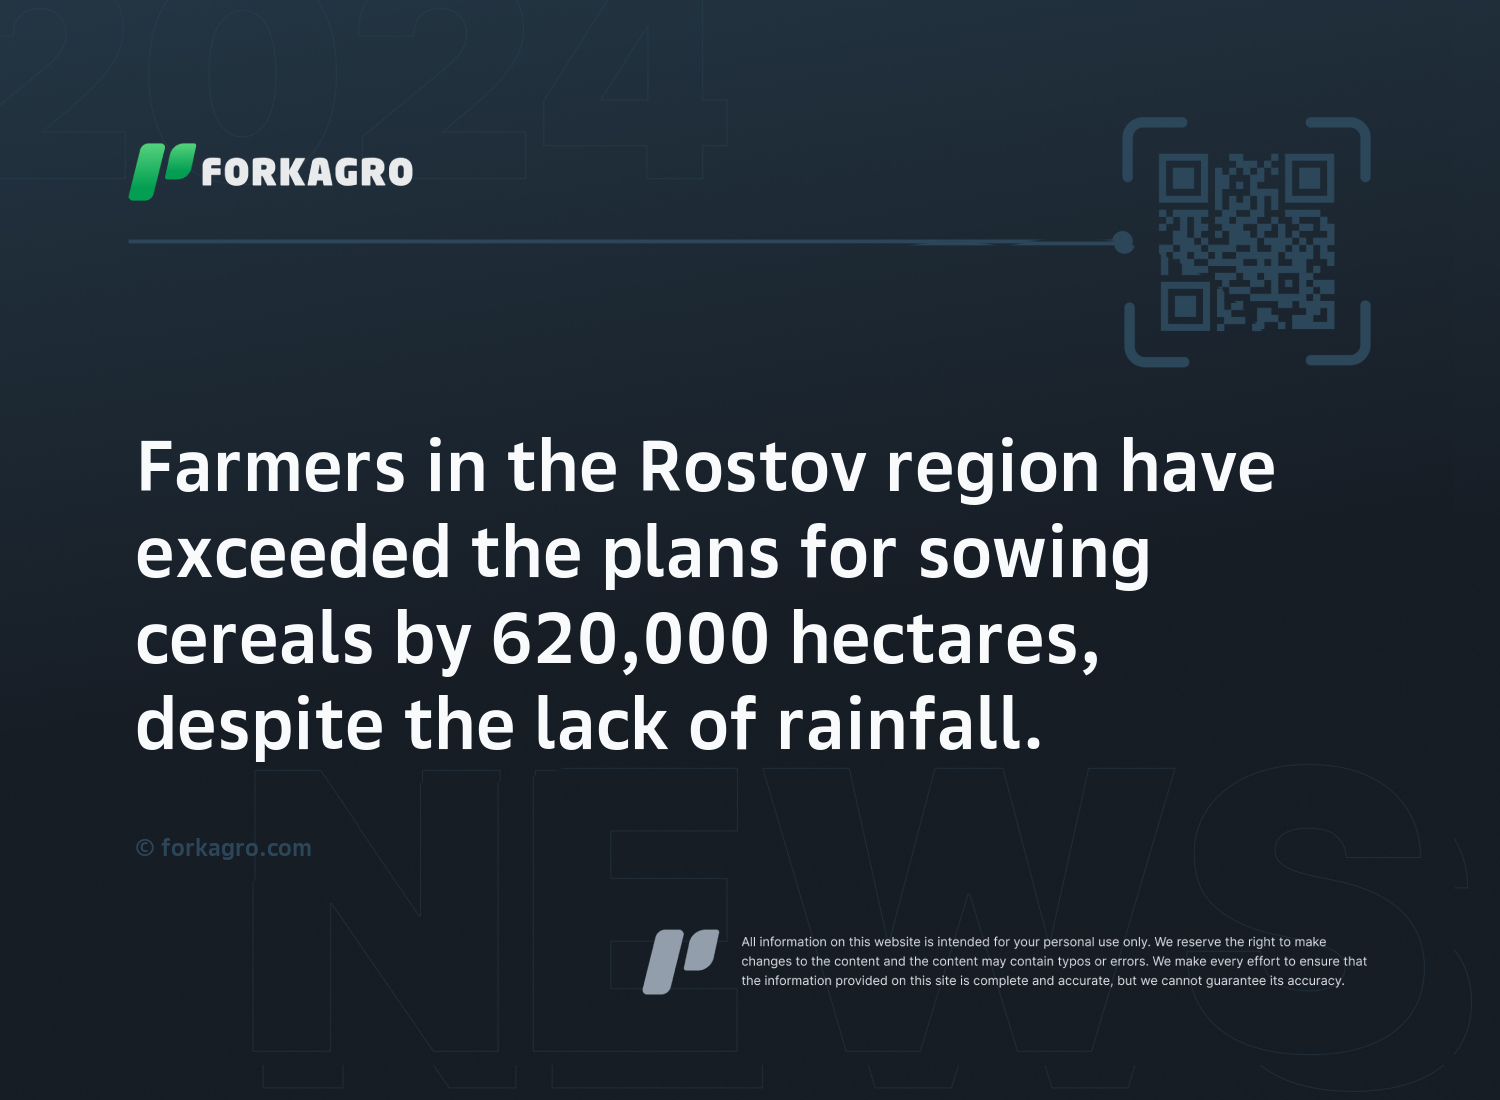 Farmers in the Rostov region have exceeded the plans for sowing cereals by 620,000 hectares, despite the lack of rainfall.